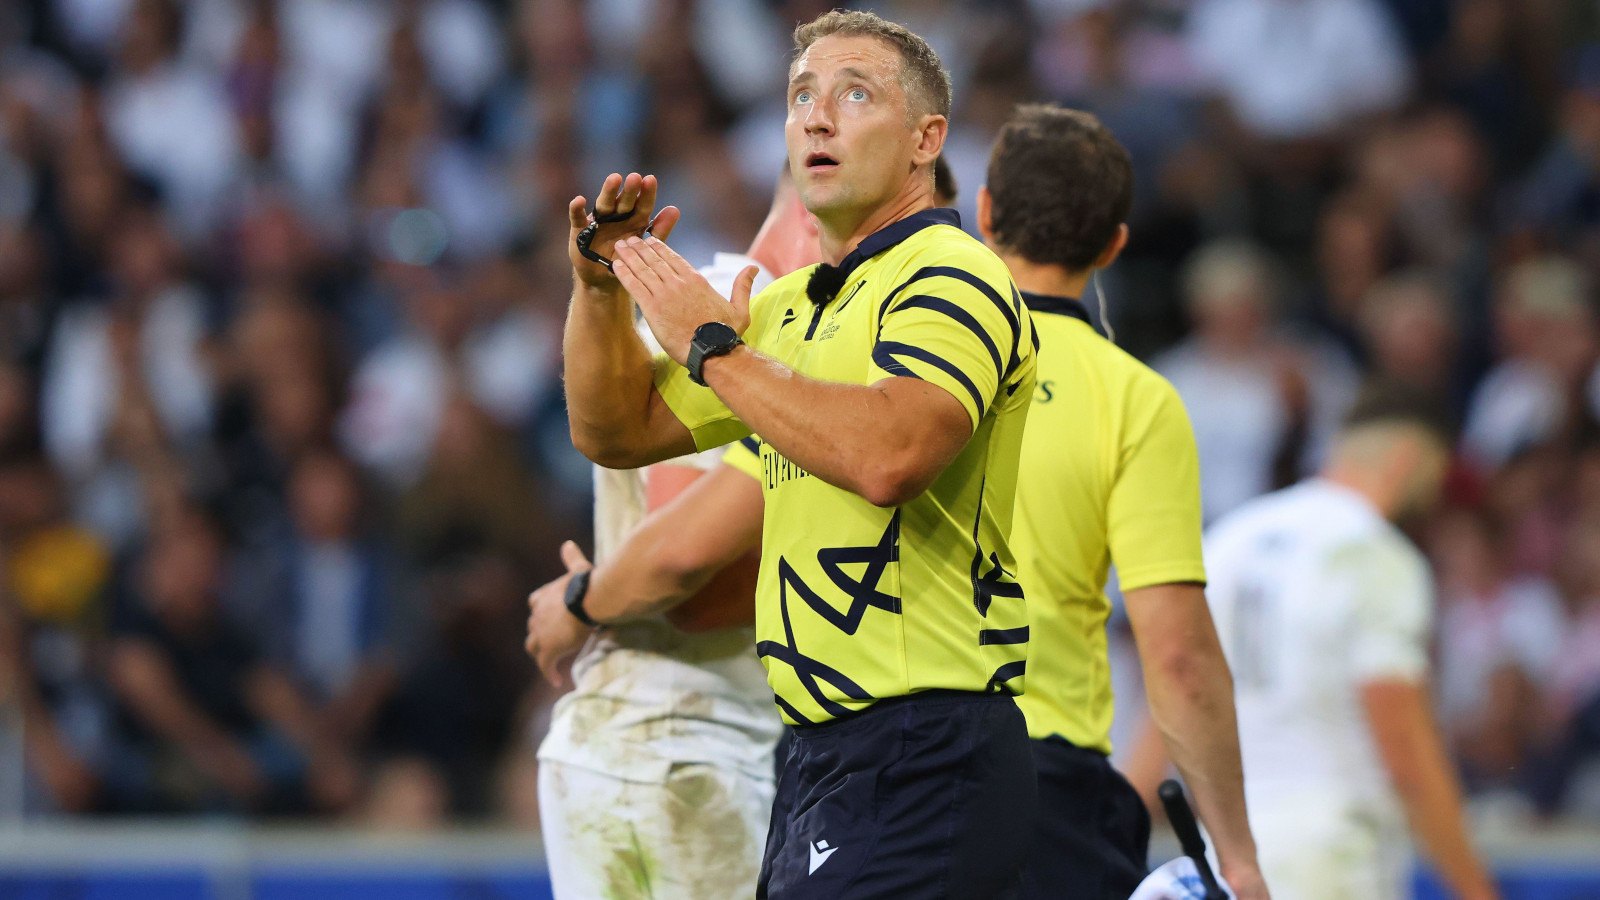 investec champions cup and challenge cup semi-final match officials revealed